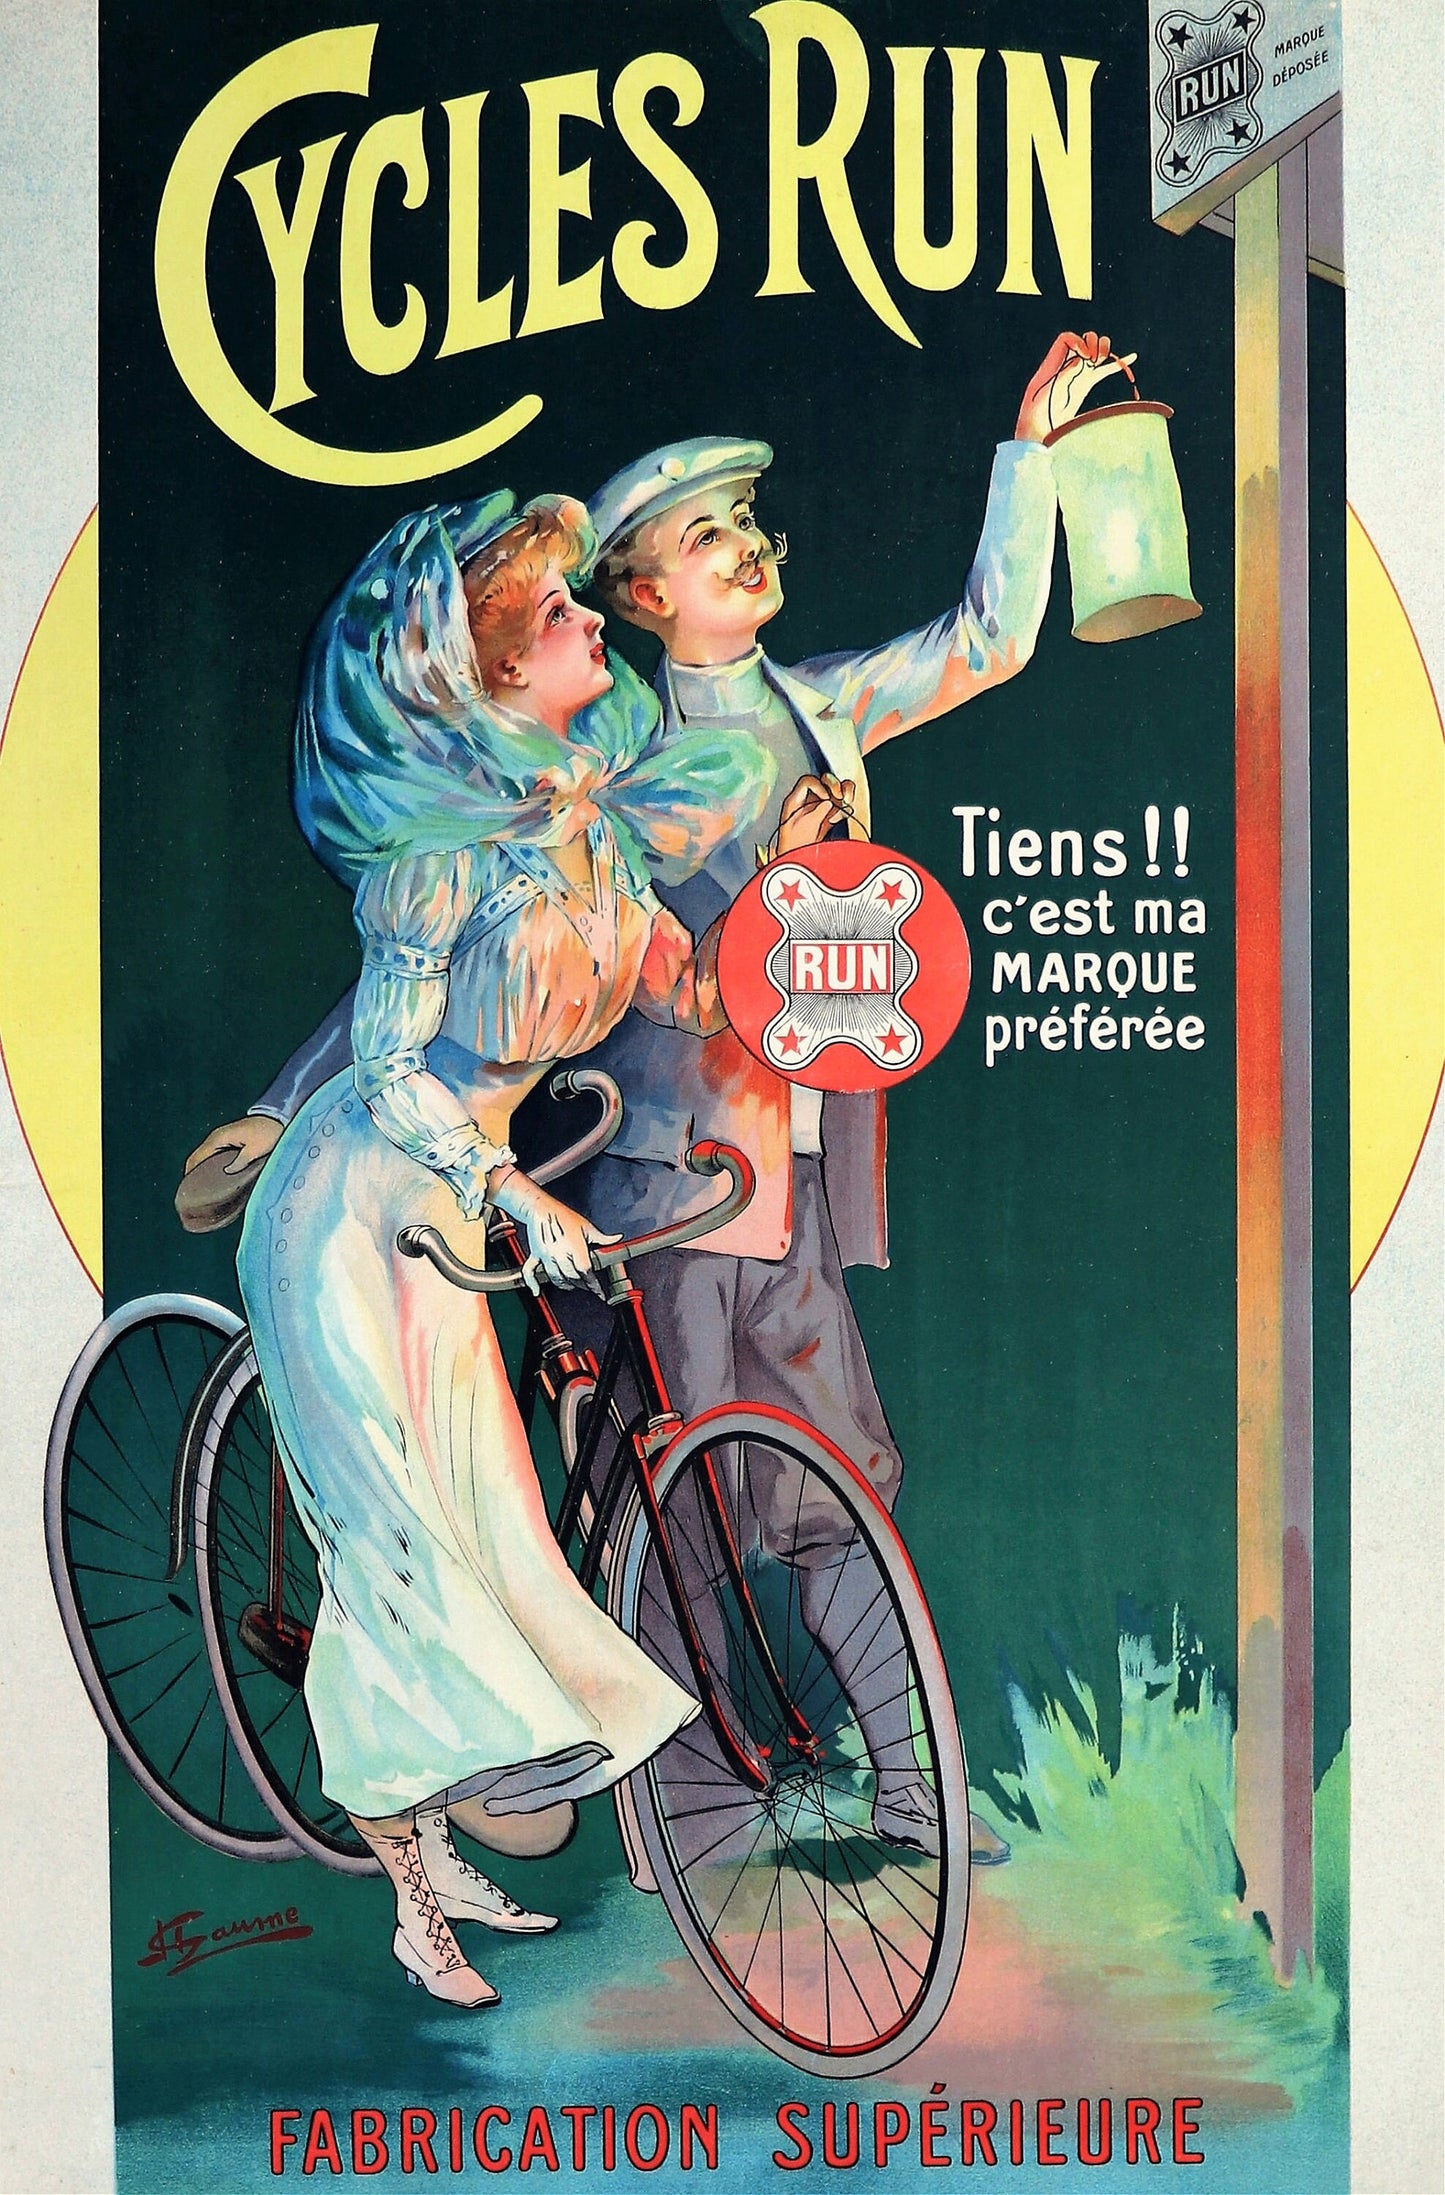 Vintage Bicycle Cycling Advertisements [42 Images]